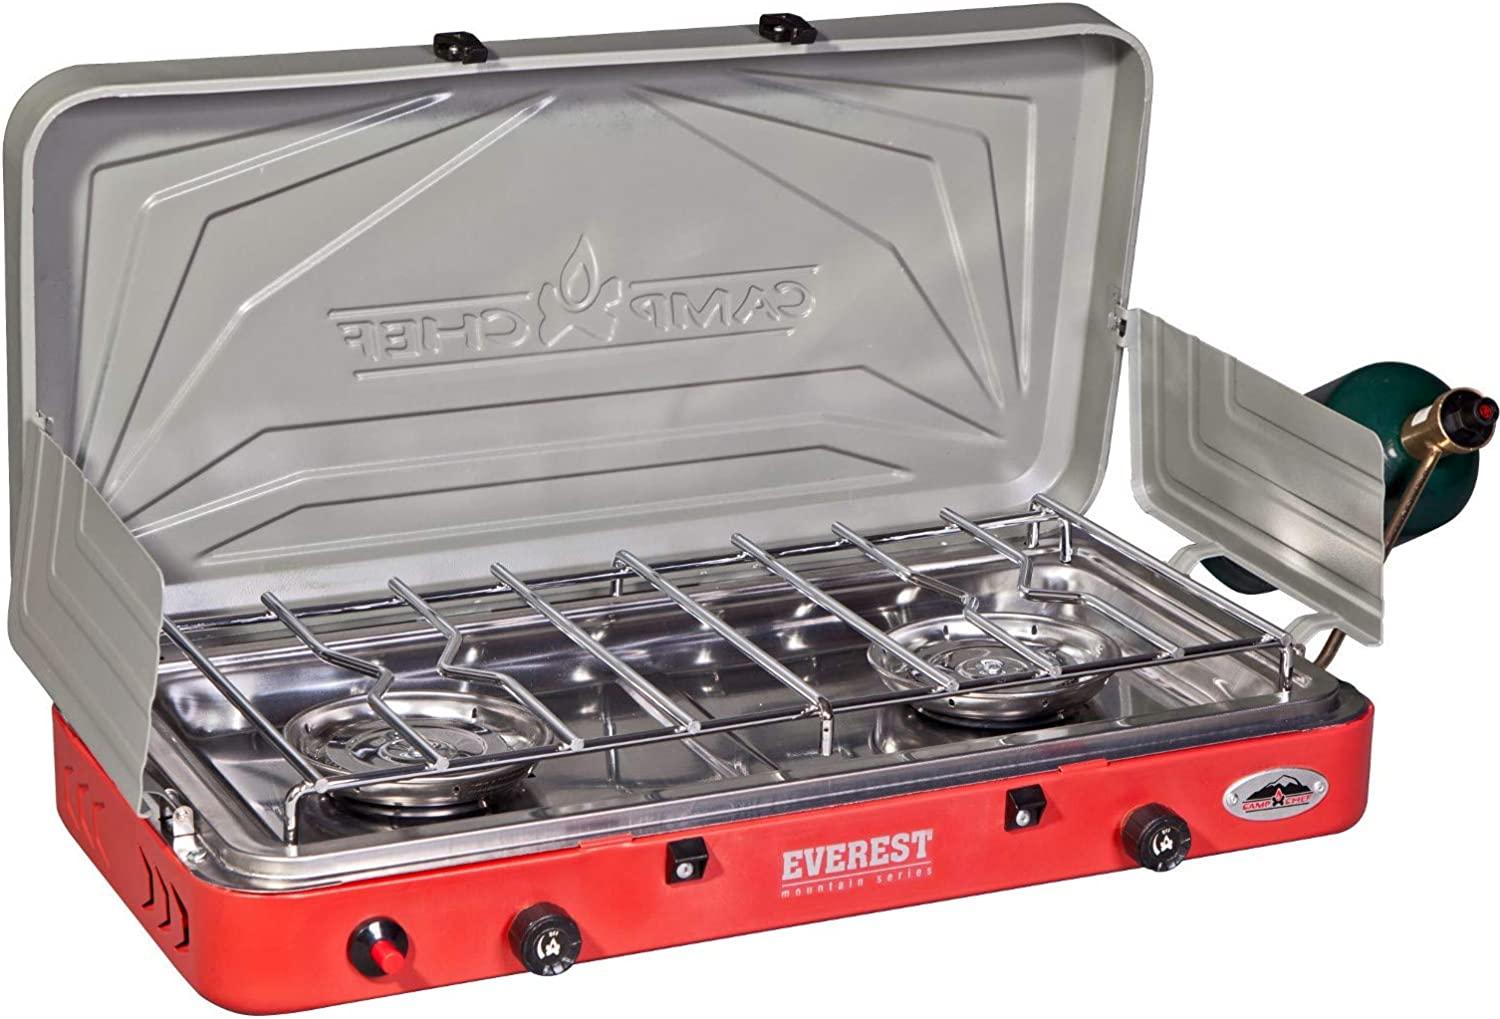 Camp Chef Everest 2-Burner Propane Camping Stove for $84.61 Shipped